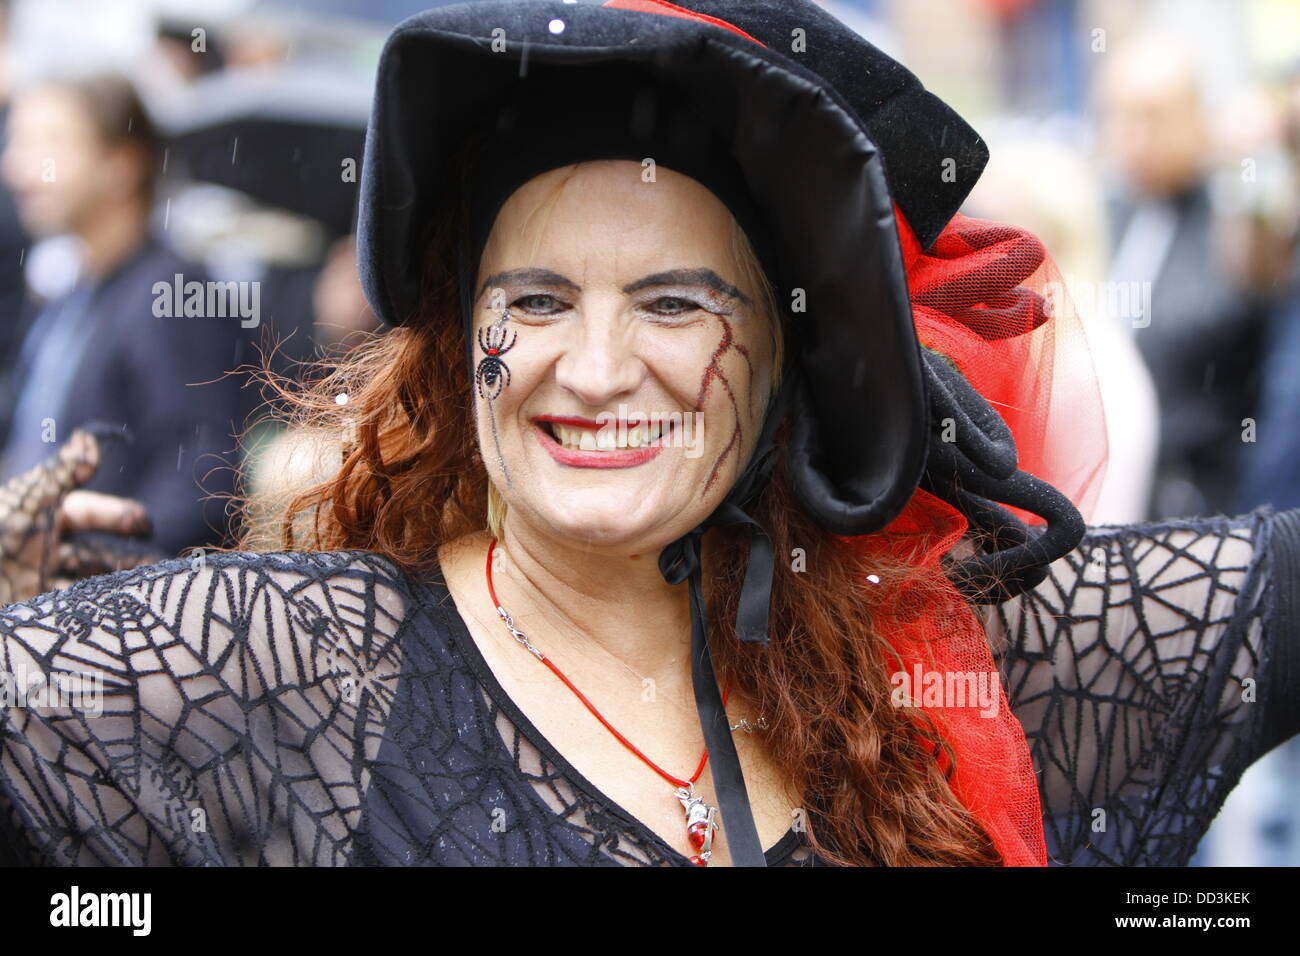 Worms, Germany. 25th August 2013. A Wissegockelhexe (witch) is pictured at the Backfischfest parade 2013. The first highlight of this year's Backfischfest was the big parade through the city of Worms with over 100 groups and floats. Community groups, sport clubs, music groups and business from Worms and further afield took part. Credit:  Michael Debets/Alamy Live News Stock Photo